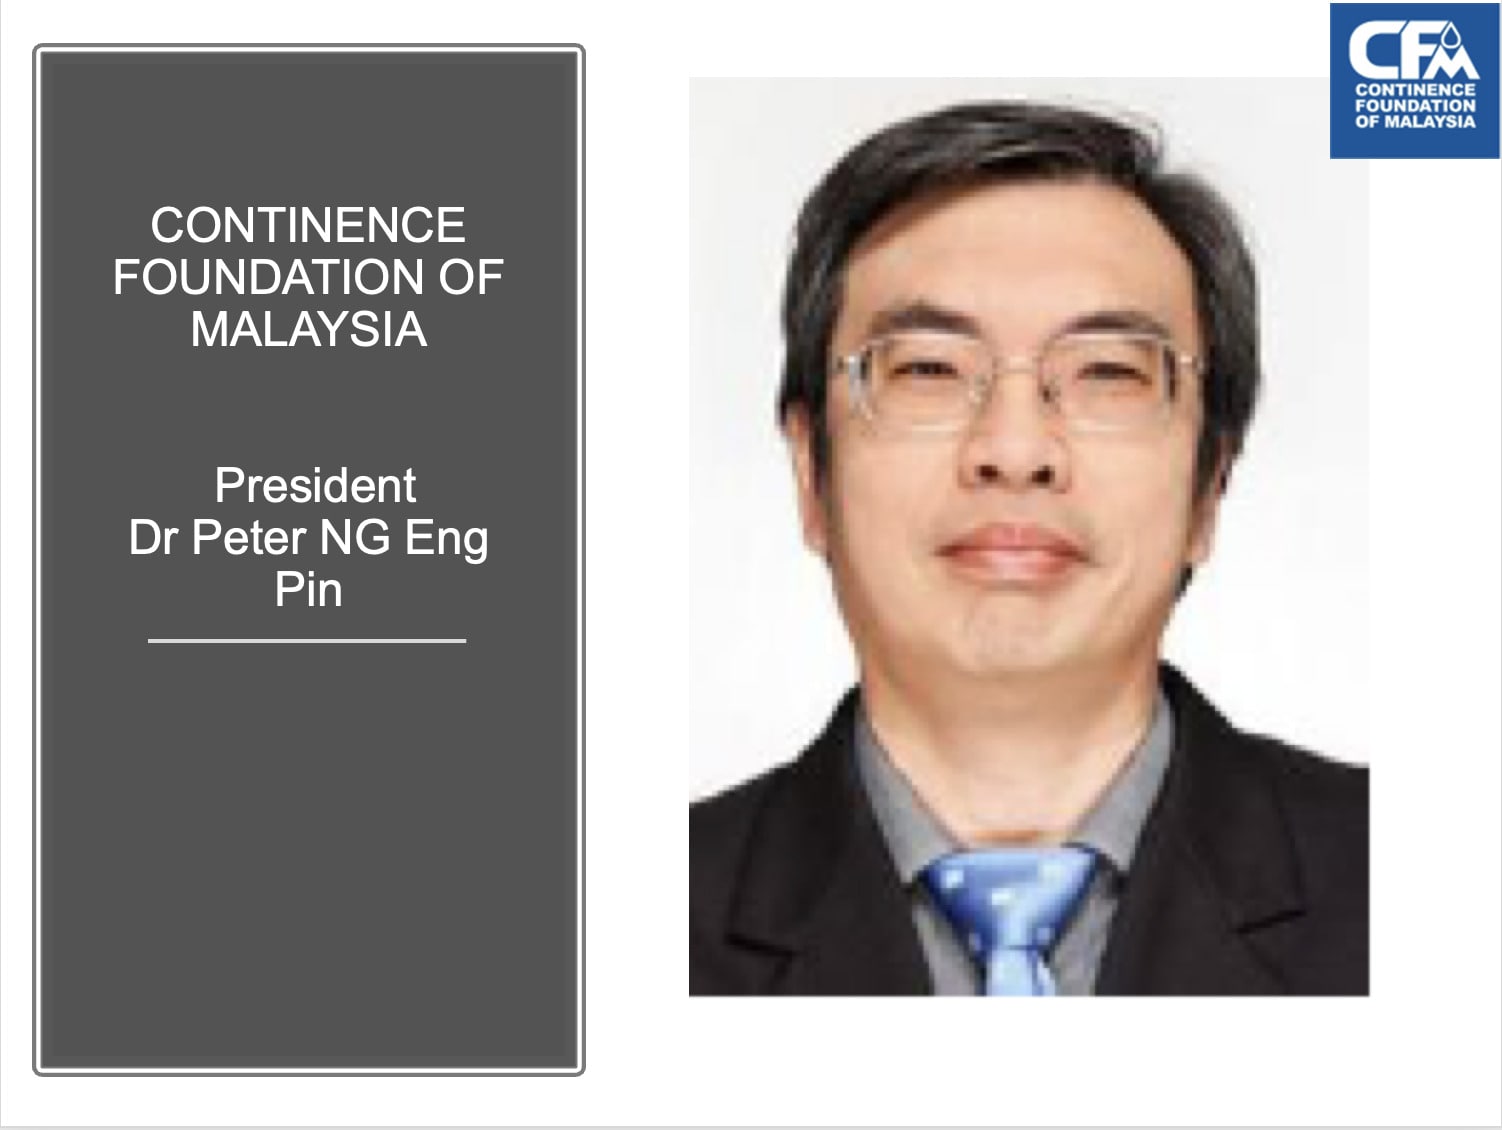 President Continence Foundation of Malaysia - Dr. Peter NG Eng Pin